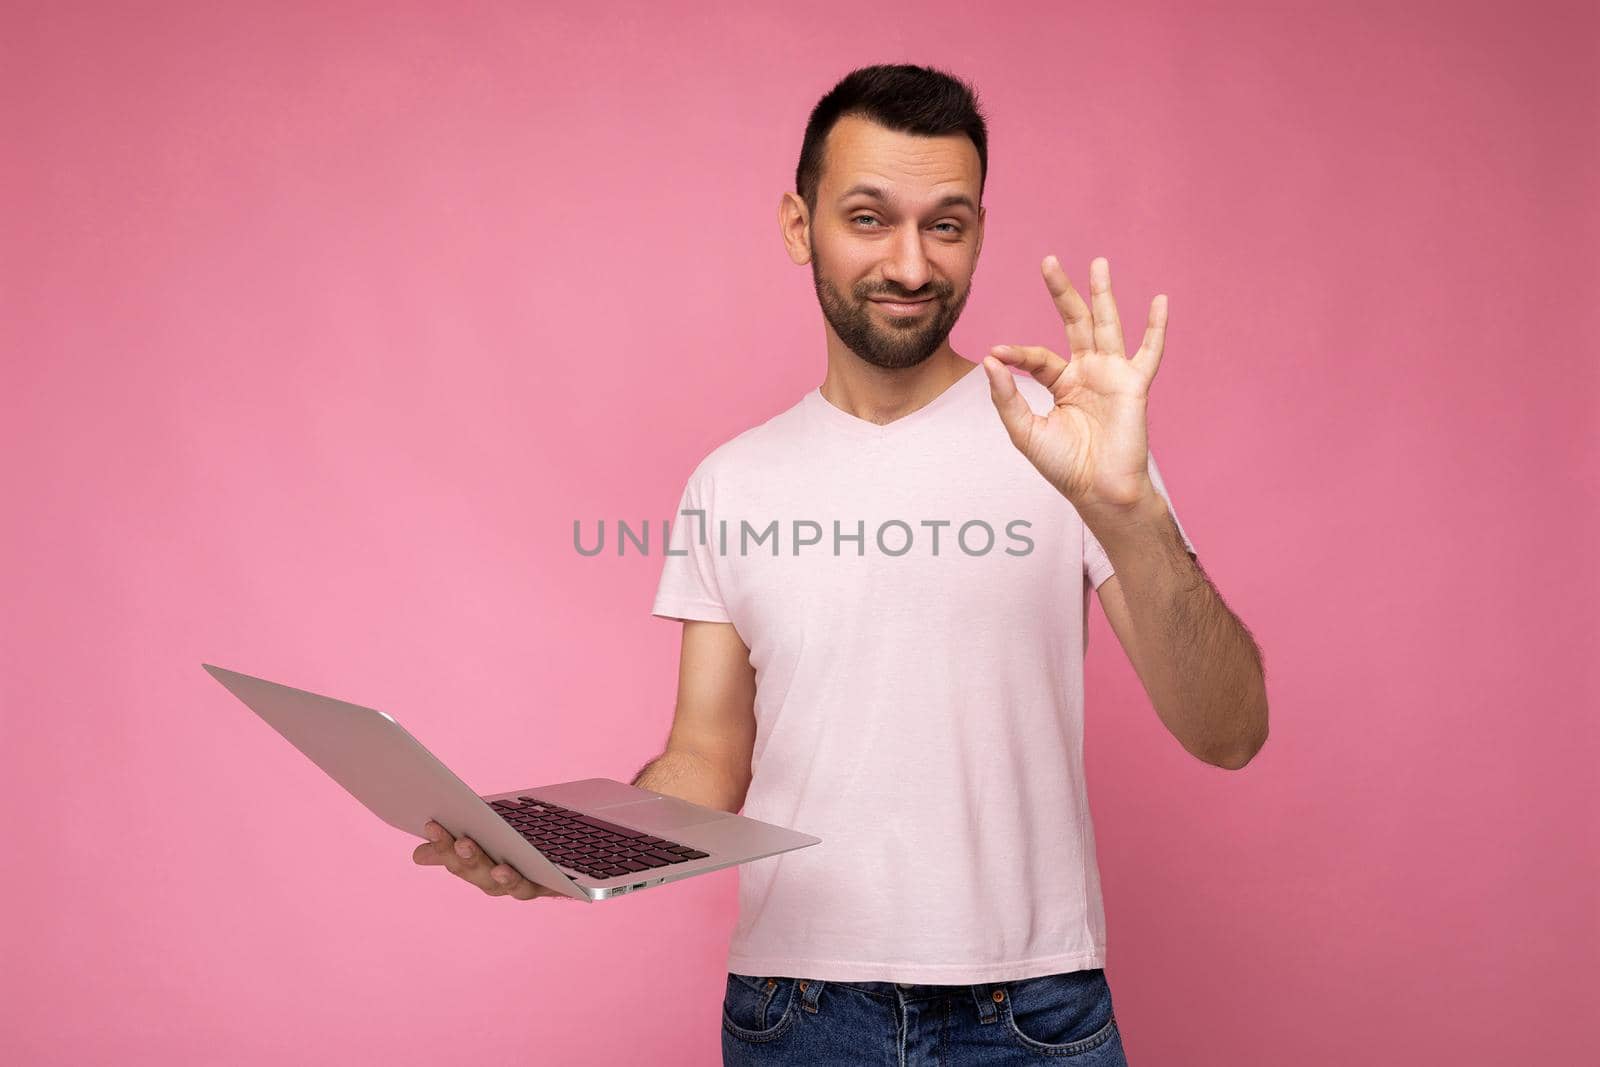 Handsome funny brunet man holding laptop computer and showing gesture okay looking at camera in t-shirt on isolated pink background by TRMK